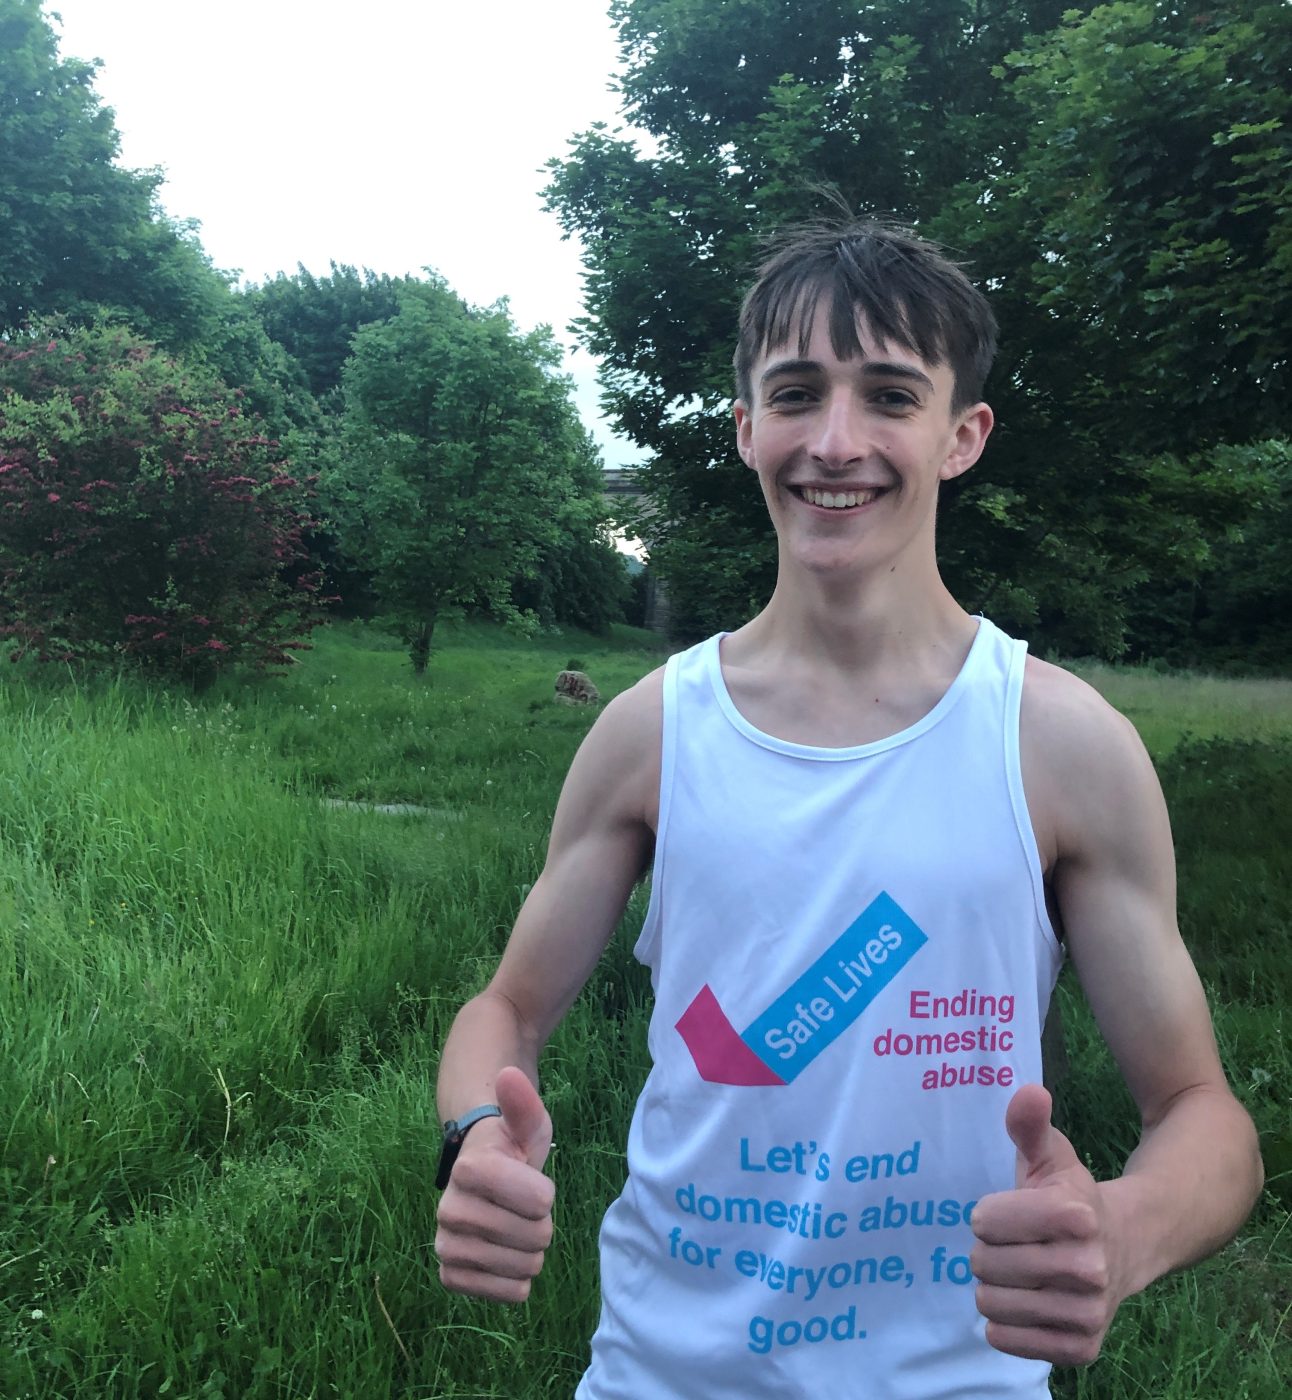 A young man wearing a SafeLives fundraising T-shirt